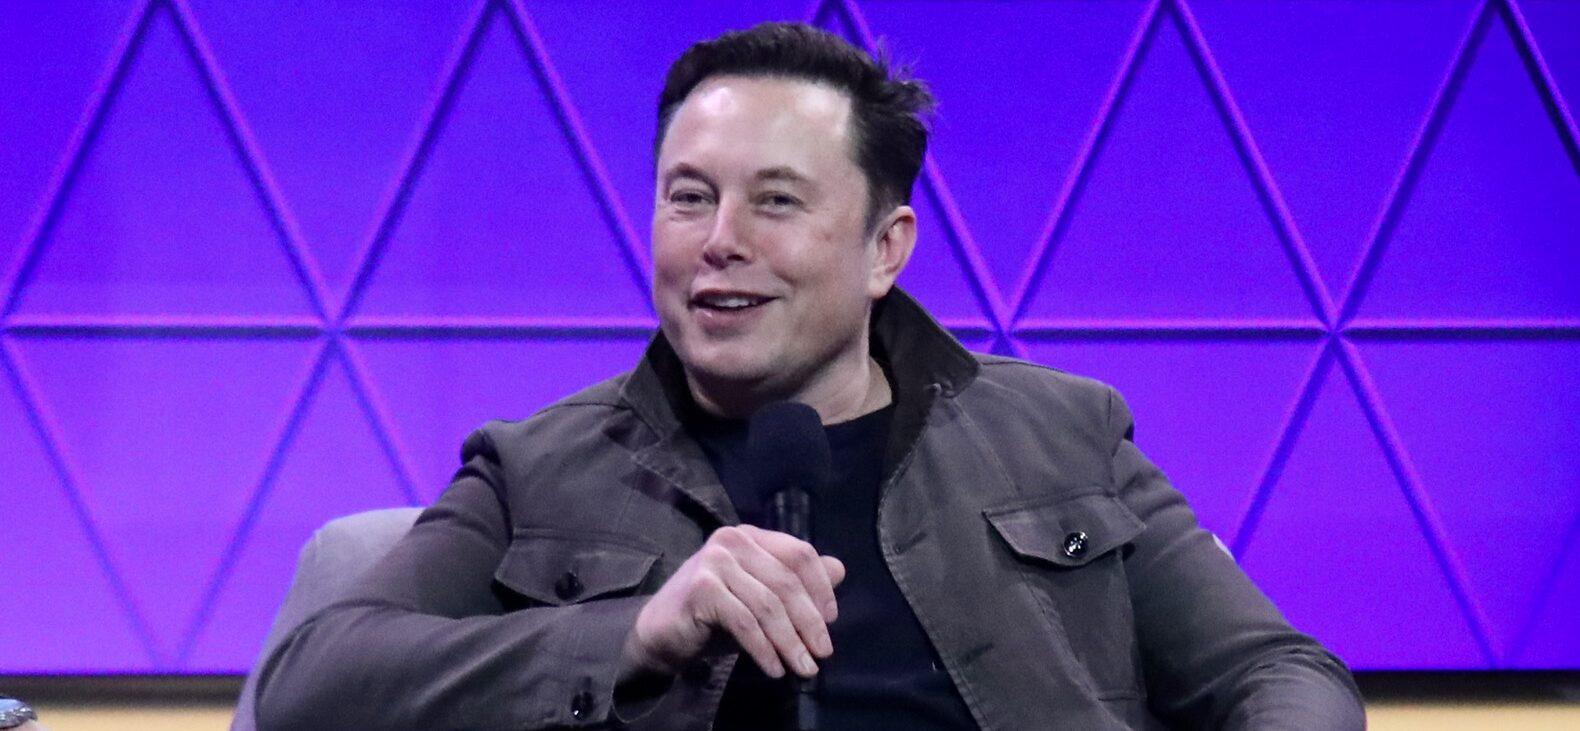 Elon Musk ‘Keeps Forgetting’ Bernie Sanders Is Alive After Call To Tax ‘Extremely Rich’